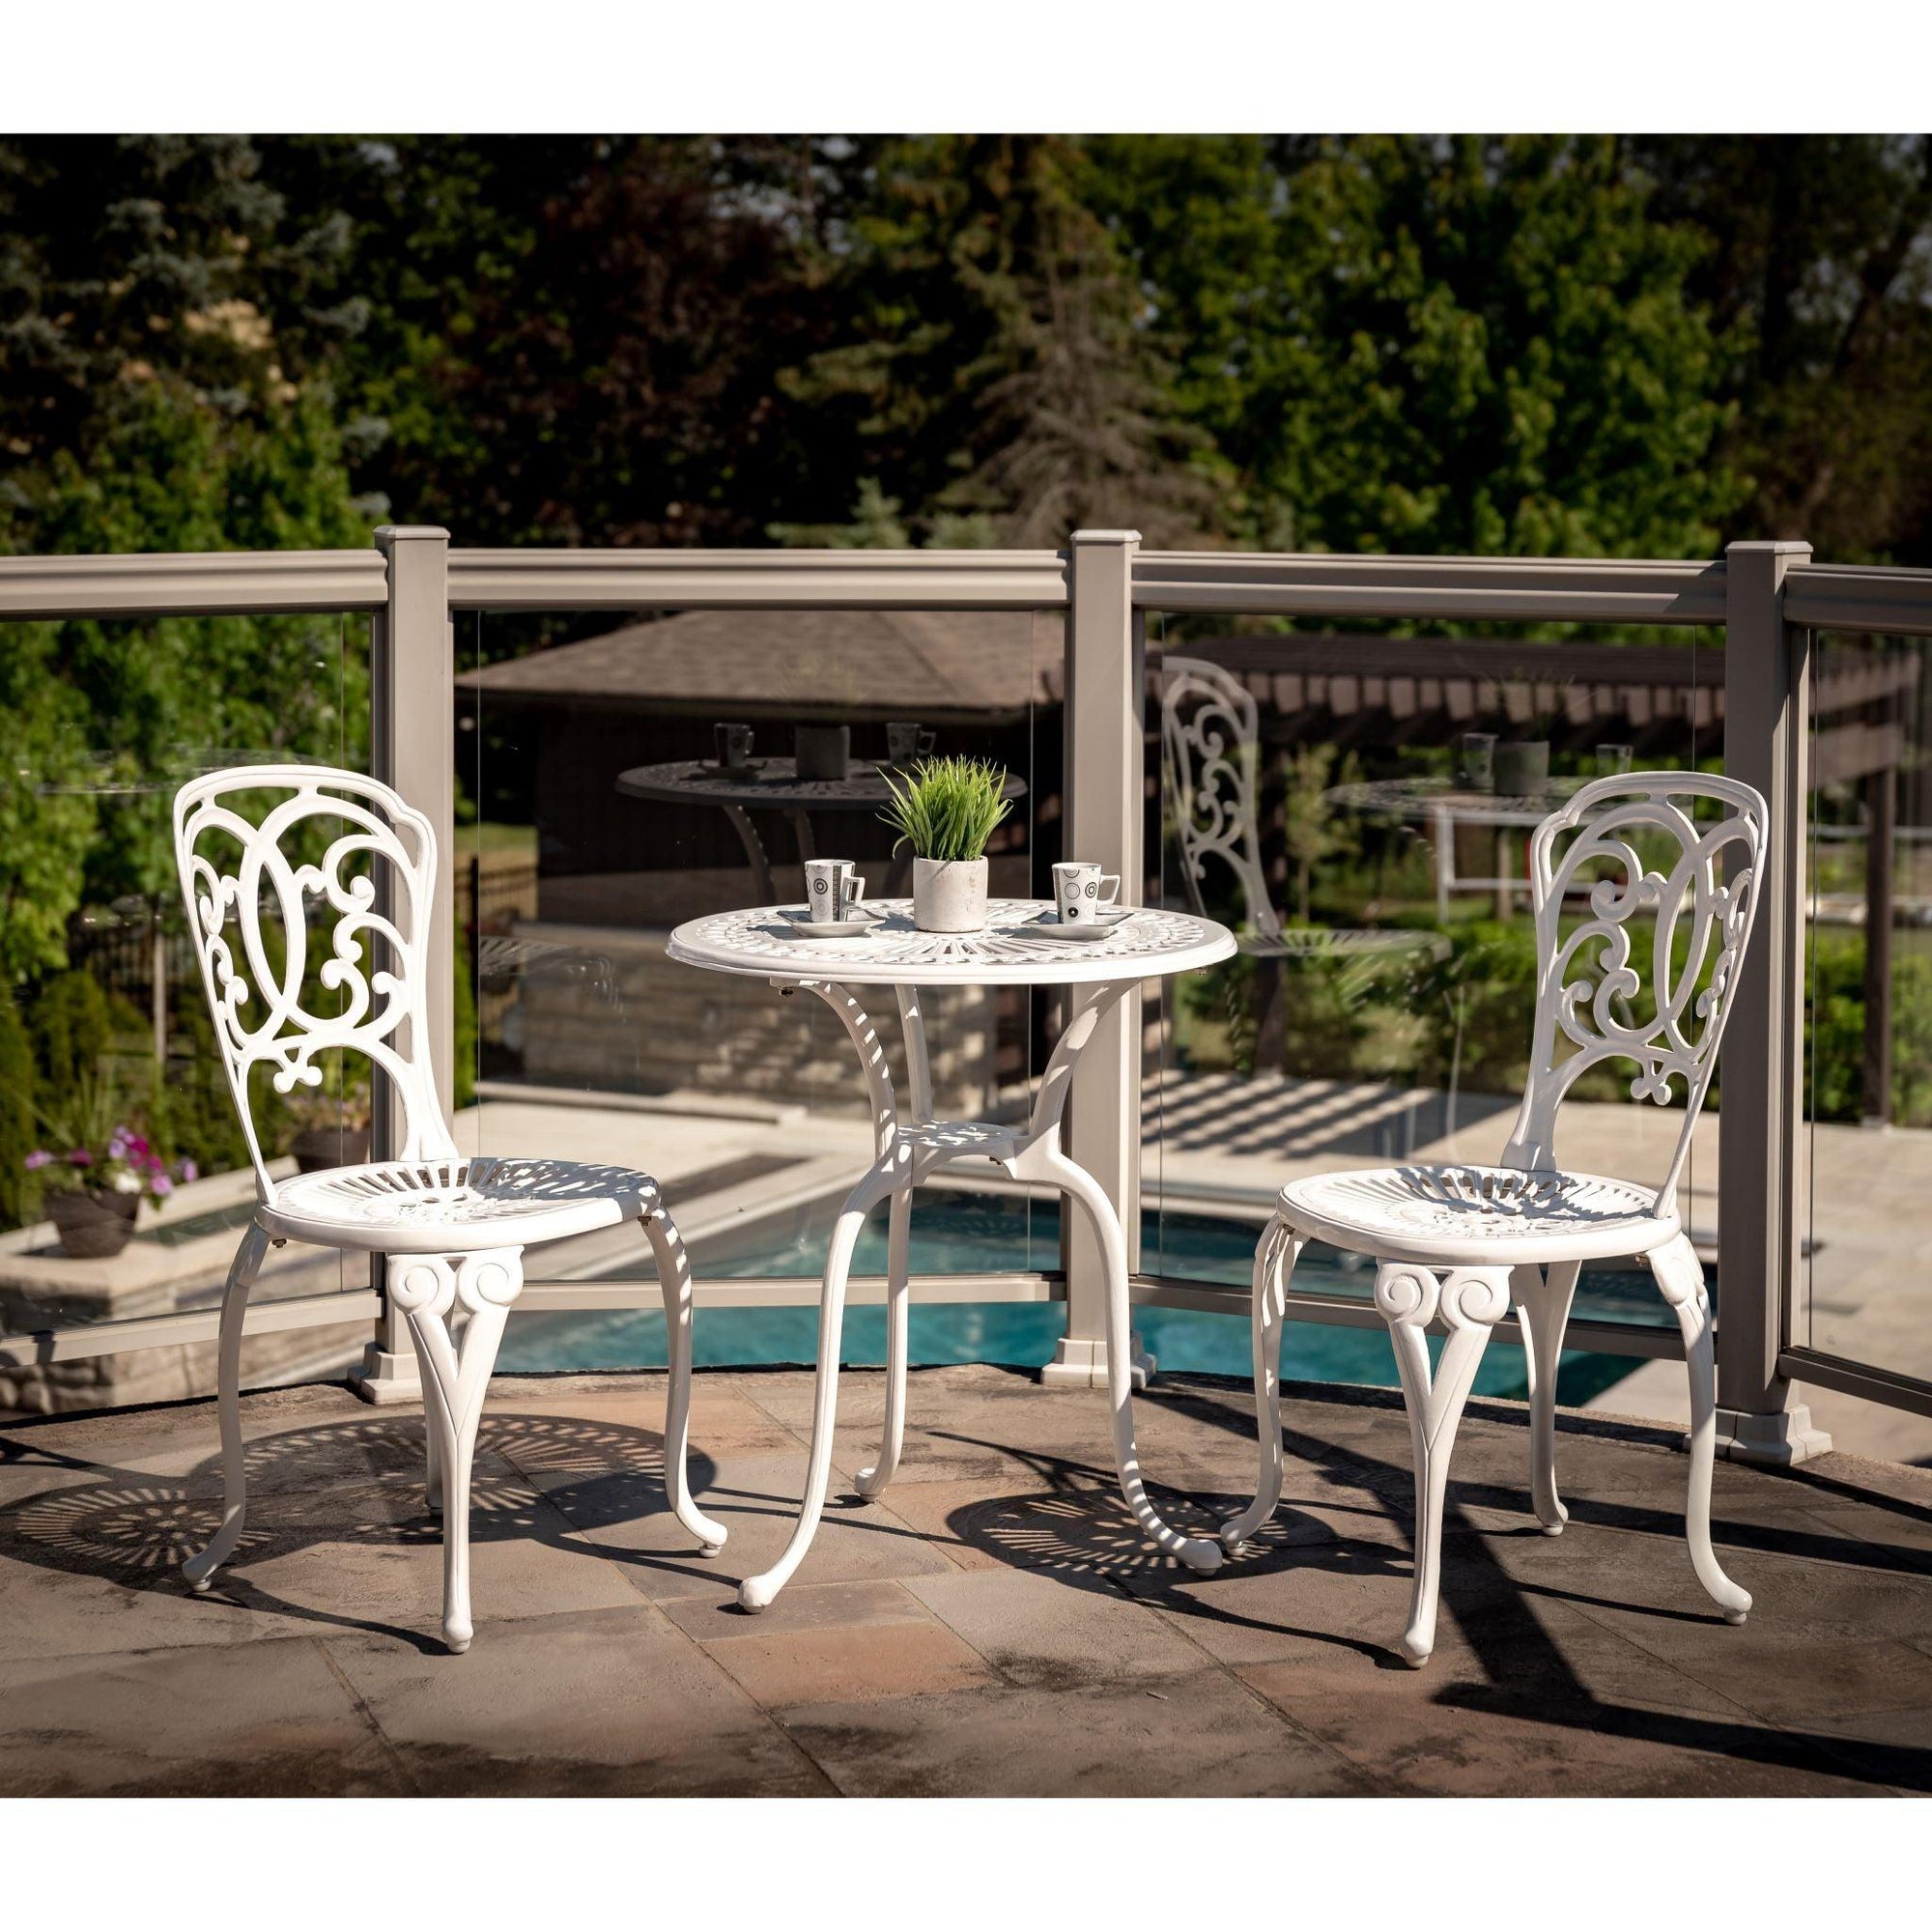 With a durable frame that lasts year over year, this bistro set is an elegant addition with intertwining designs to capture anyone’s eye. The 24in round table allows for intimate conversation while enjoying your outdoor living. 